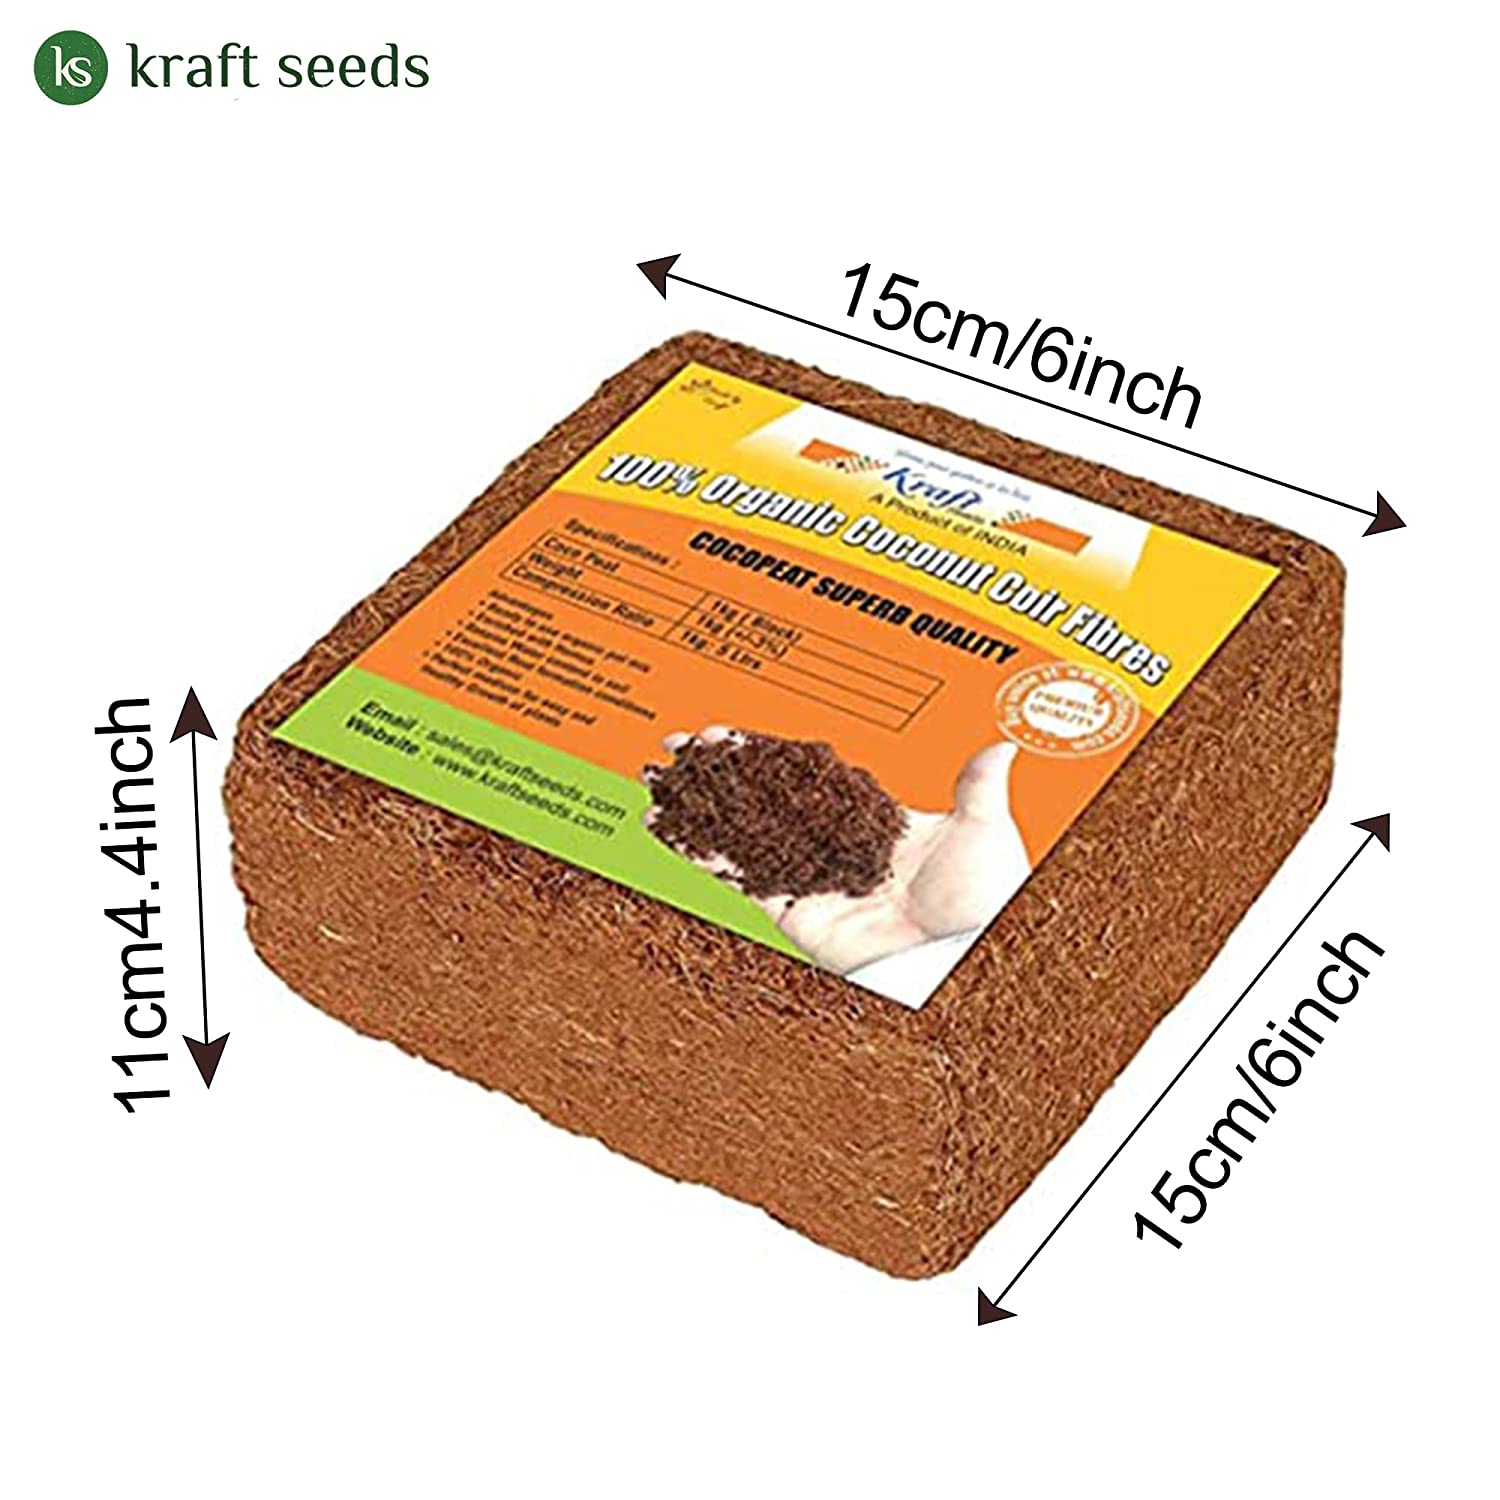 kraft seeds cocopeat for garden 1kg block | expands upto 5 kg spectacular quality coco peat powder 100% natural eco friendly